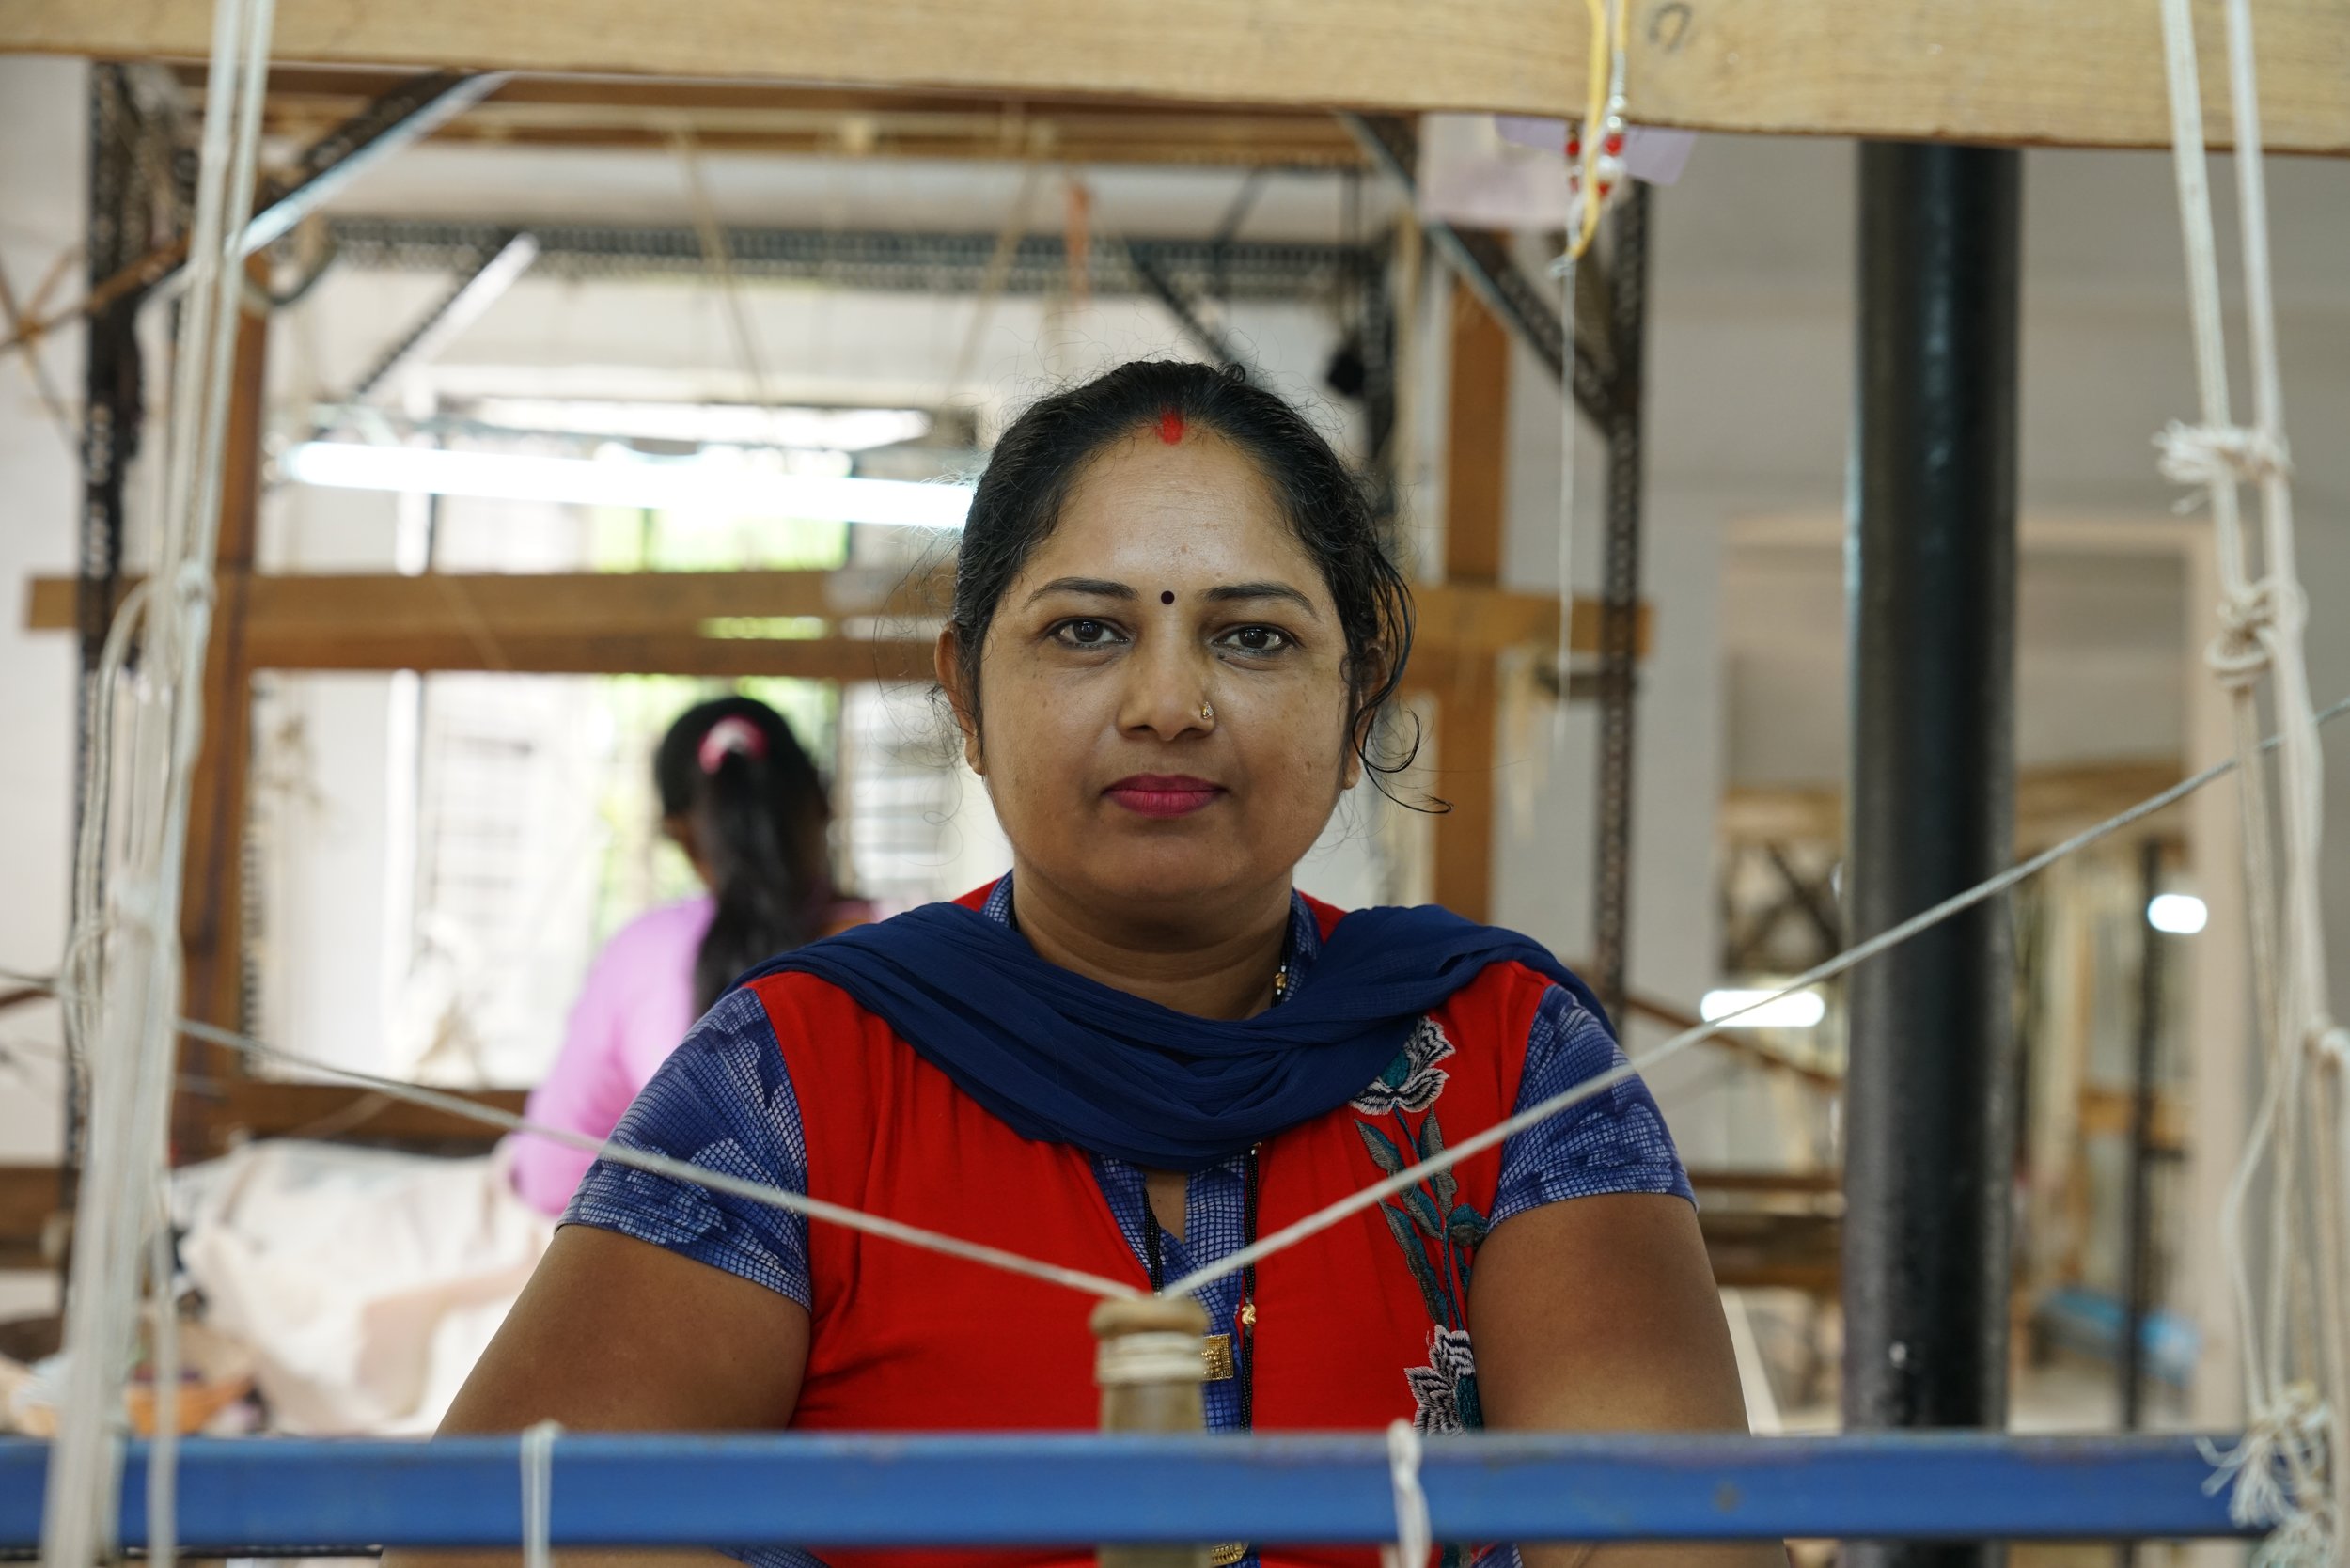 A portrait of the one of the students at the handloom school, which is a few miles away from WomenWeave's headquarters.